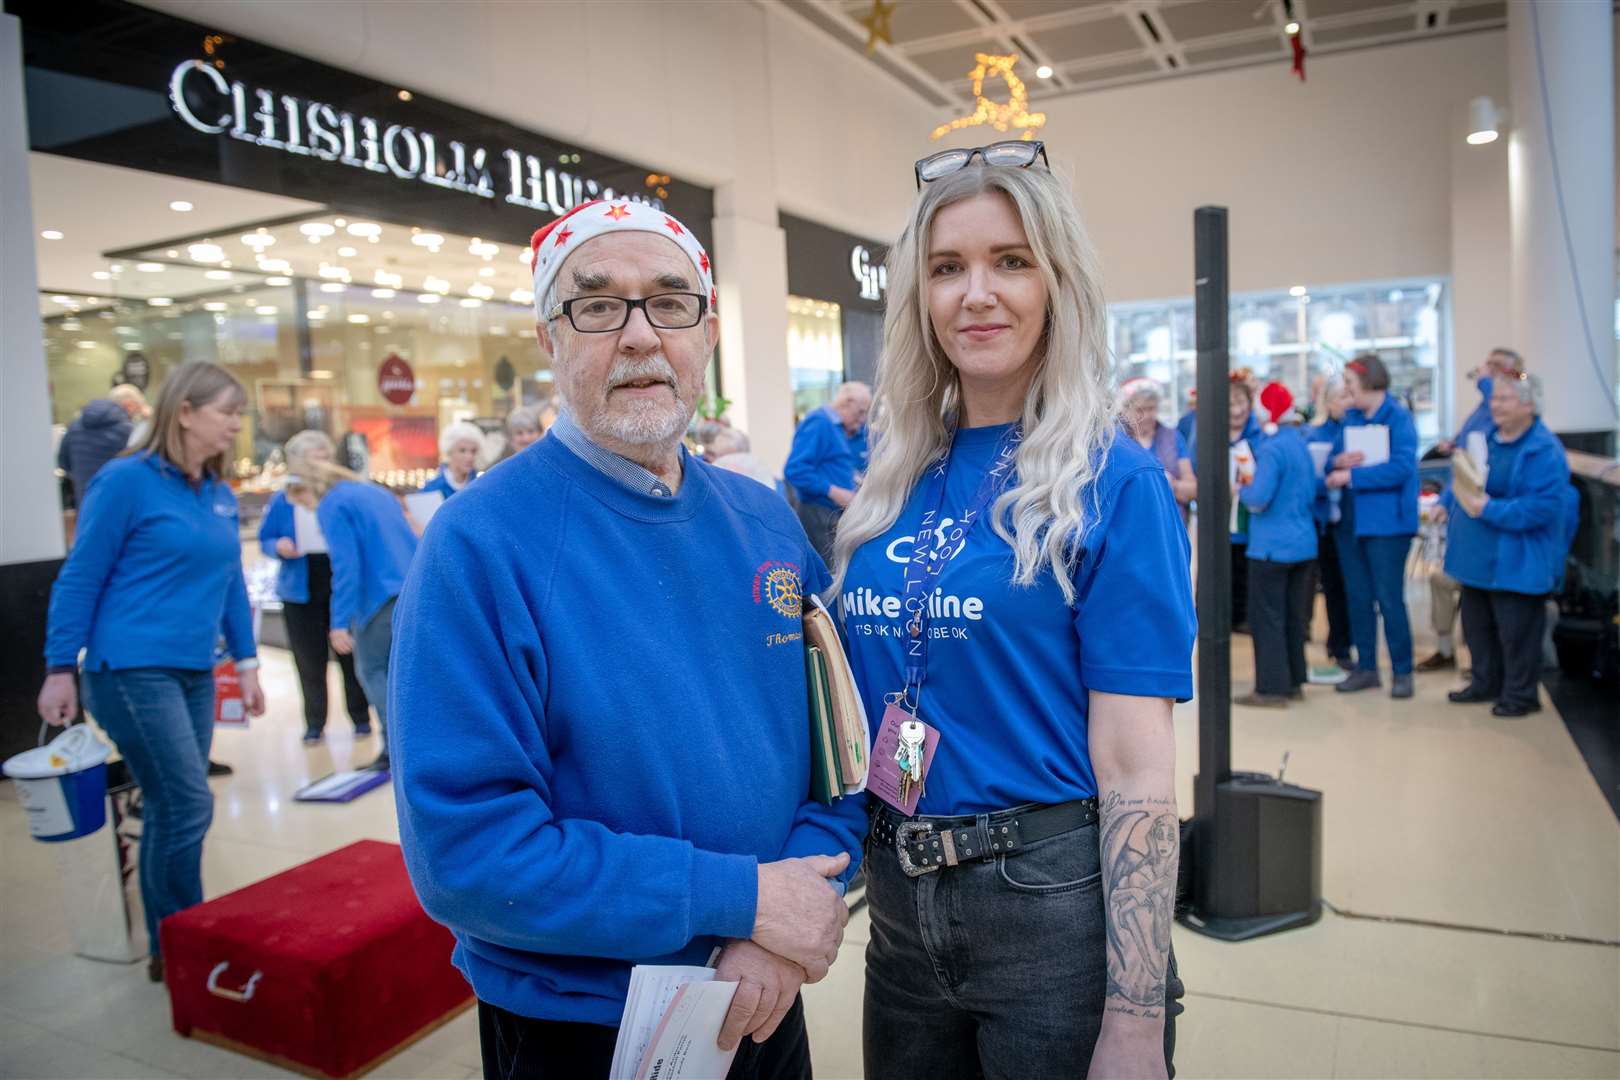 Inverness Choral Society's Thomas Prag and Shelly O'Donnell from New Look at last year's carolthon in Eastgate Shopping Centre. Picture: Callum Mackay